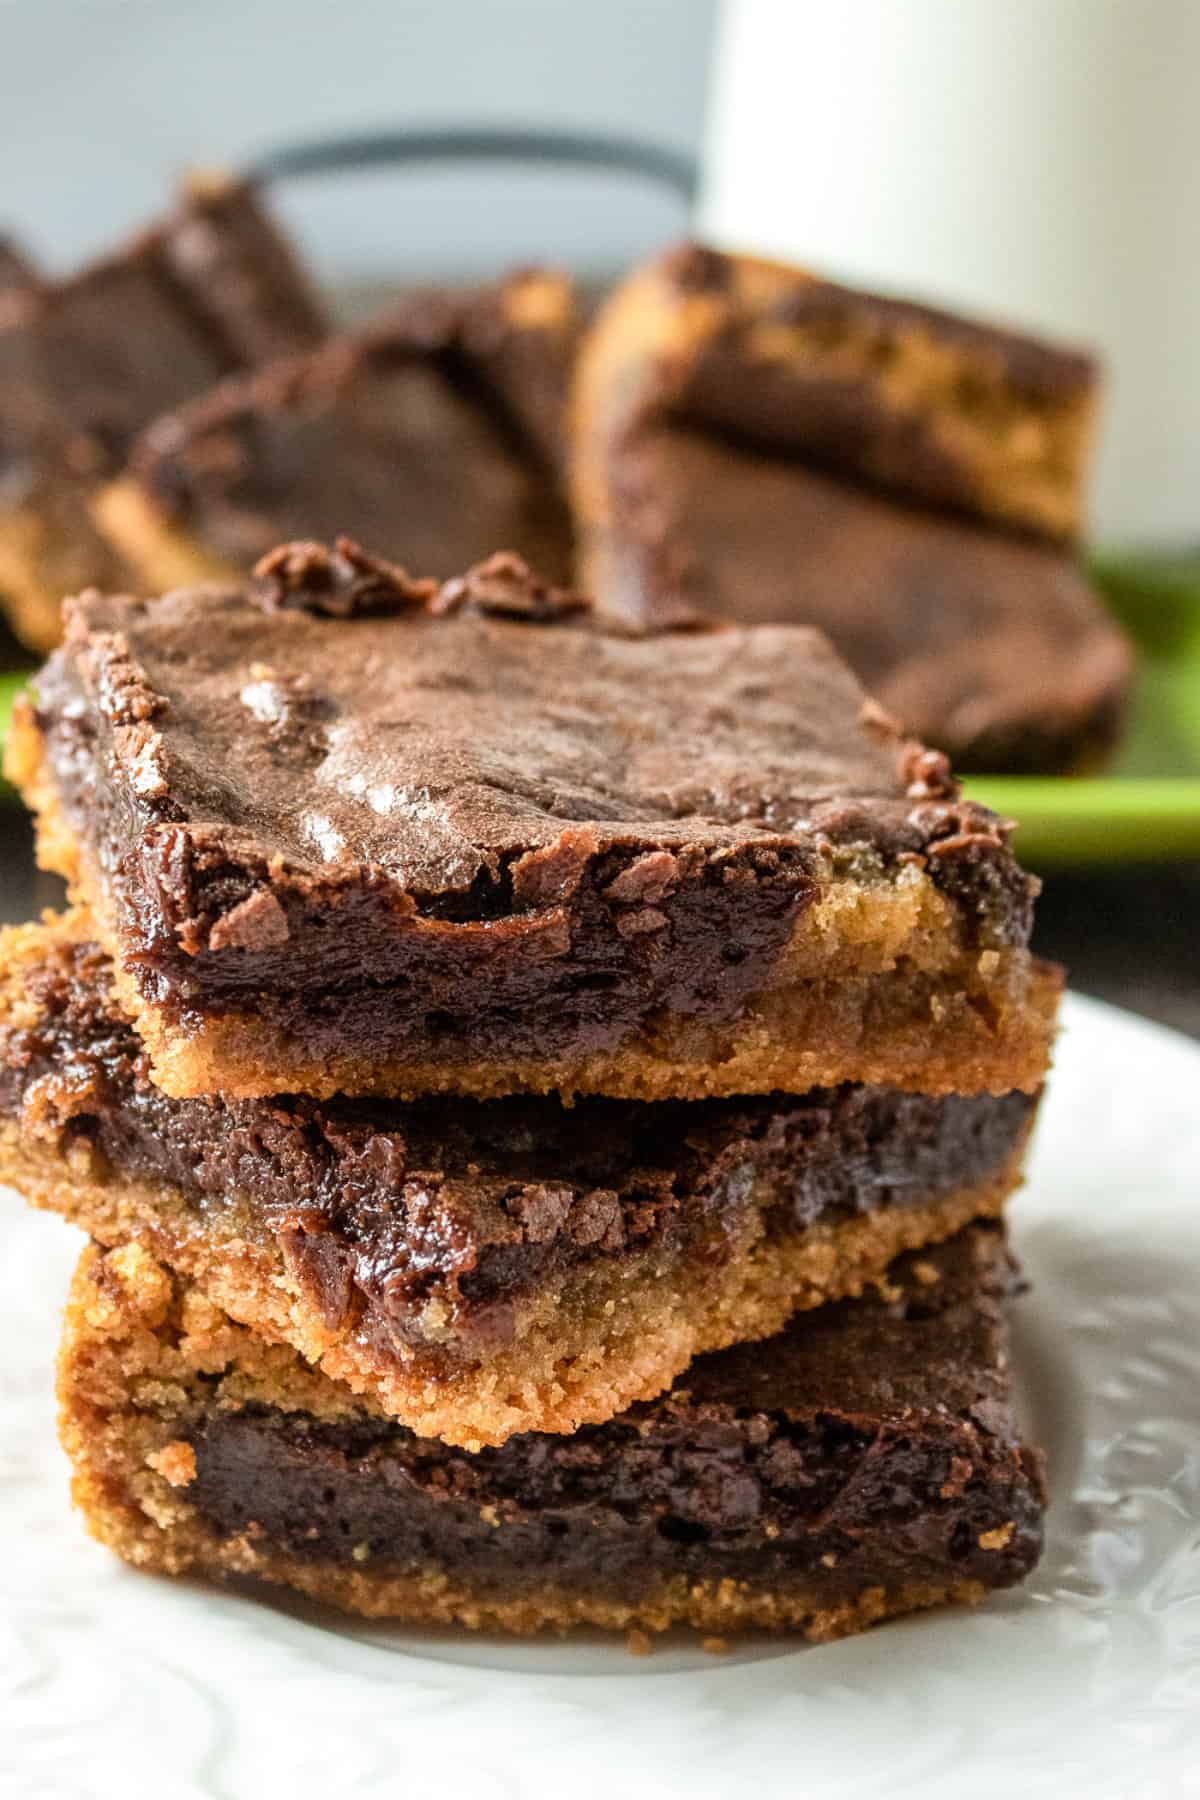 father's day dessert ideas chocolate peanut butter brownies.